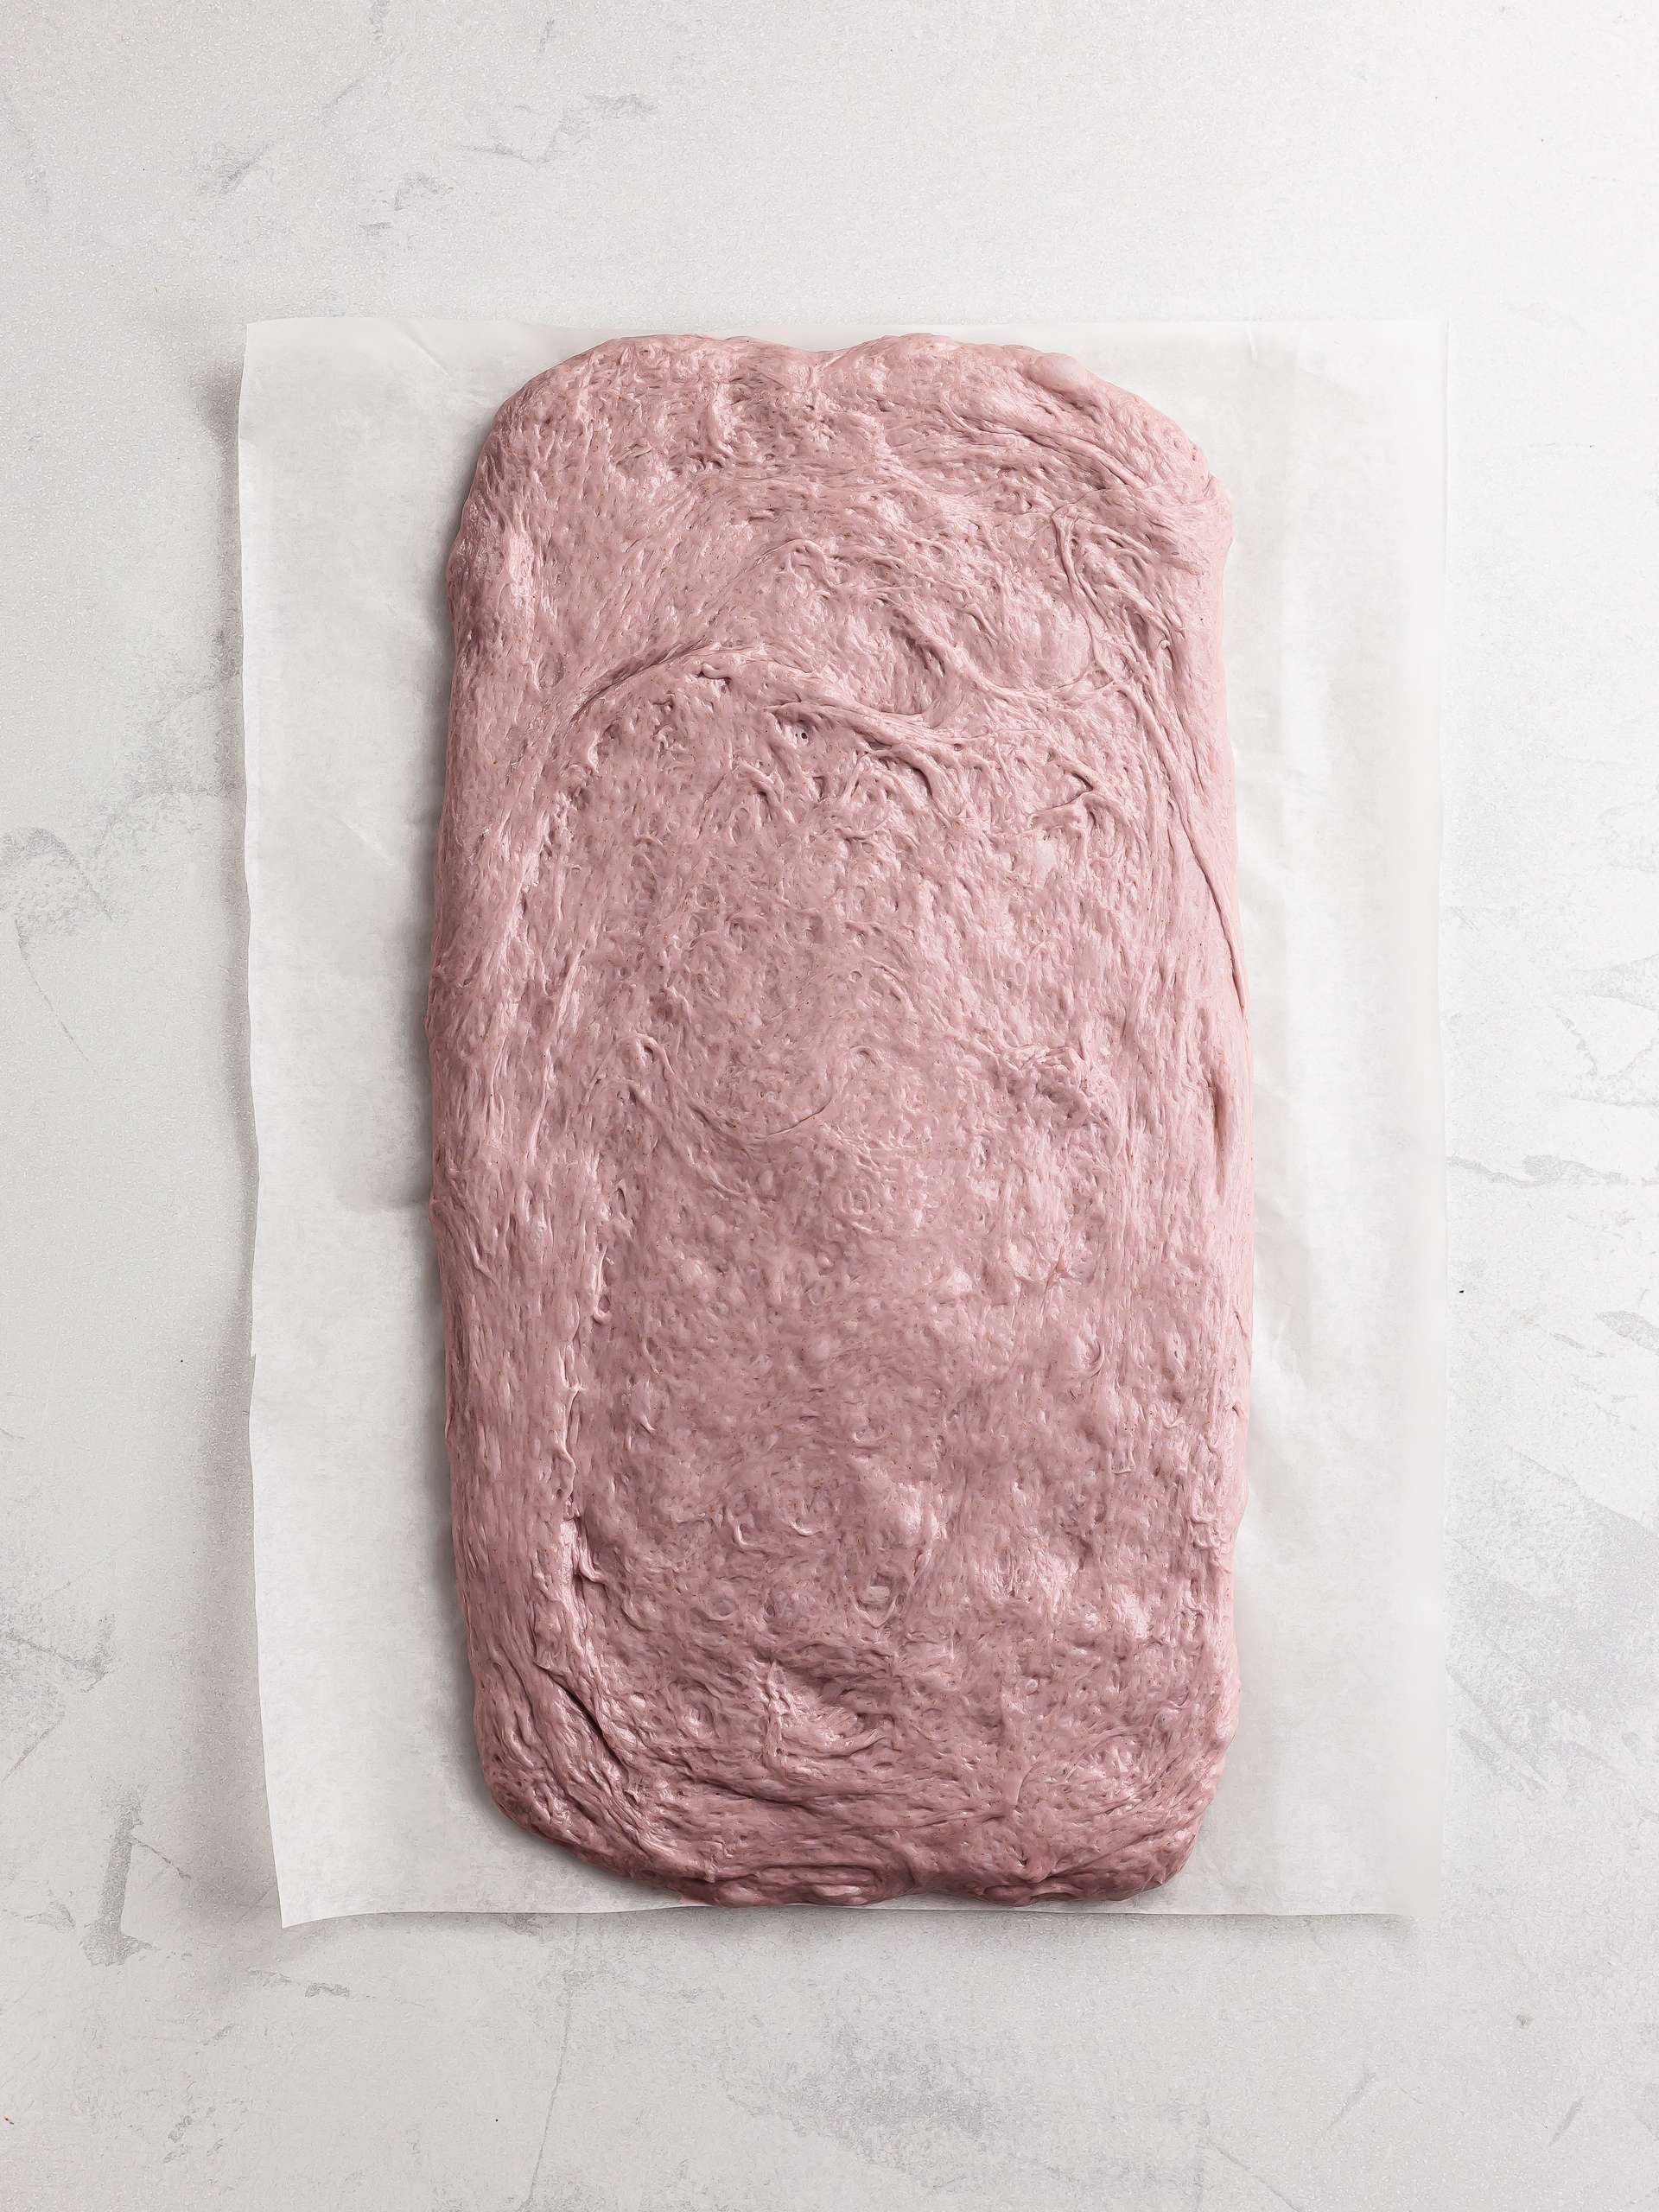 ube bread dough rolled out on baking paper